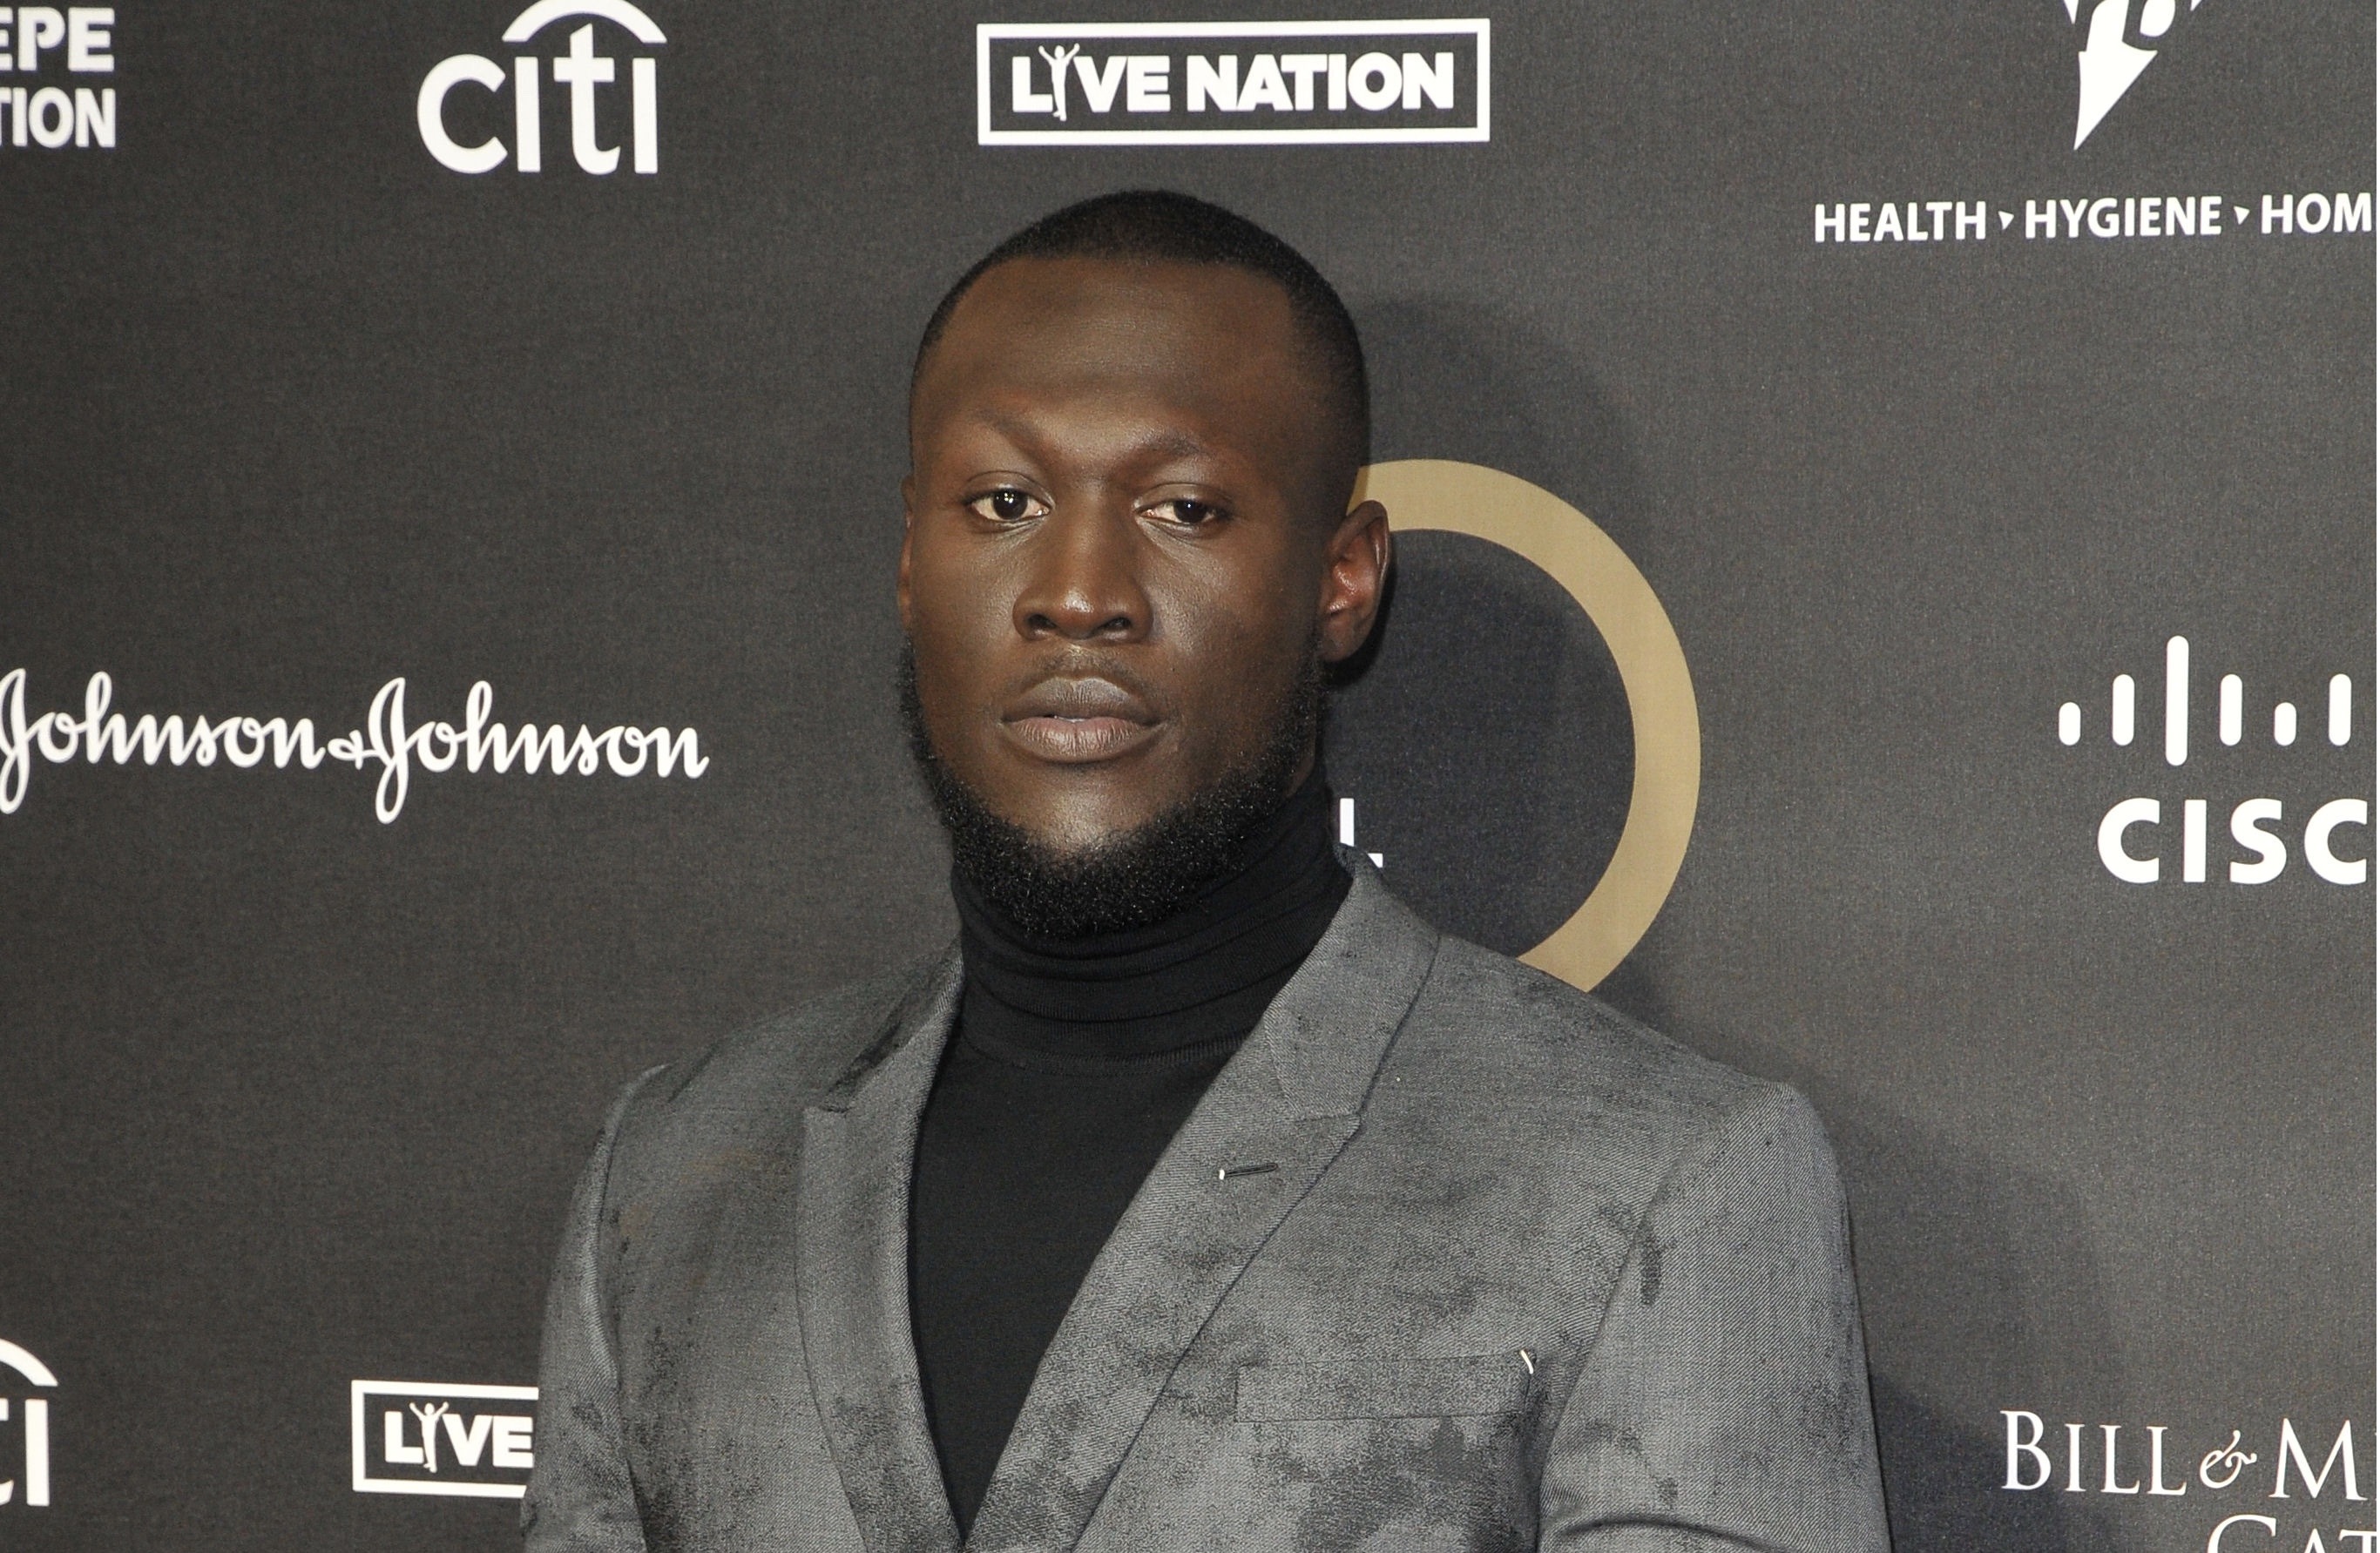 Stormzy to play three ‘super intimate’ shows at Kingston’s Rose Theatre which sold out in seconds